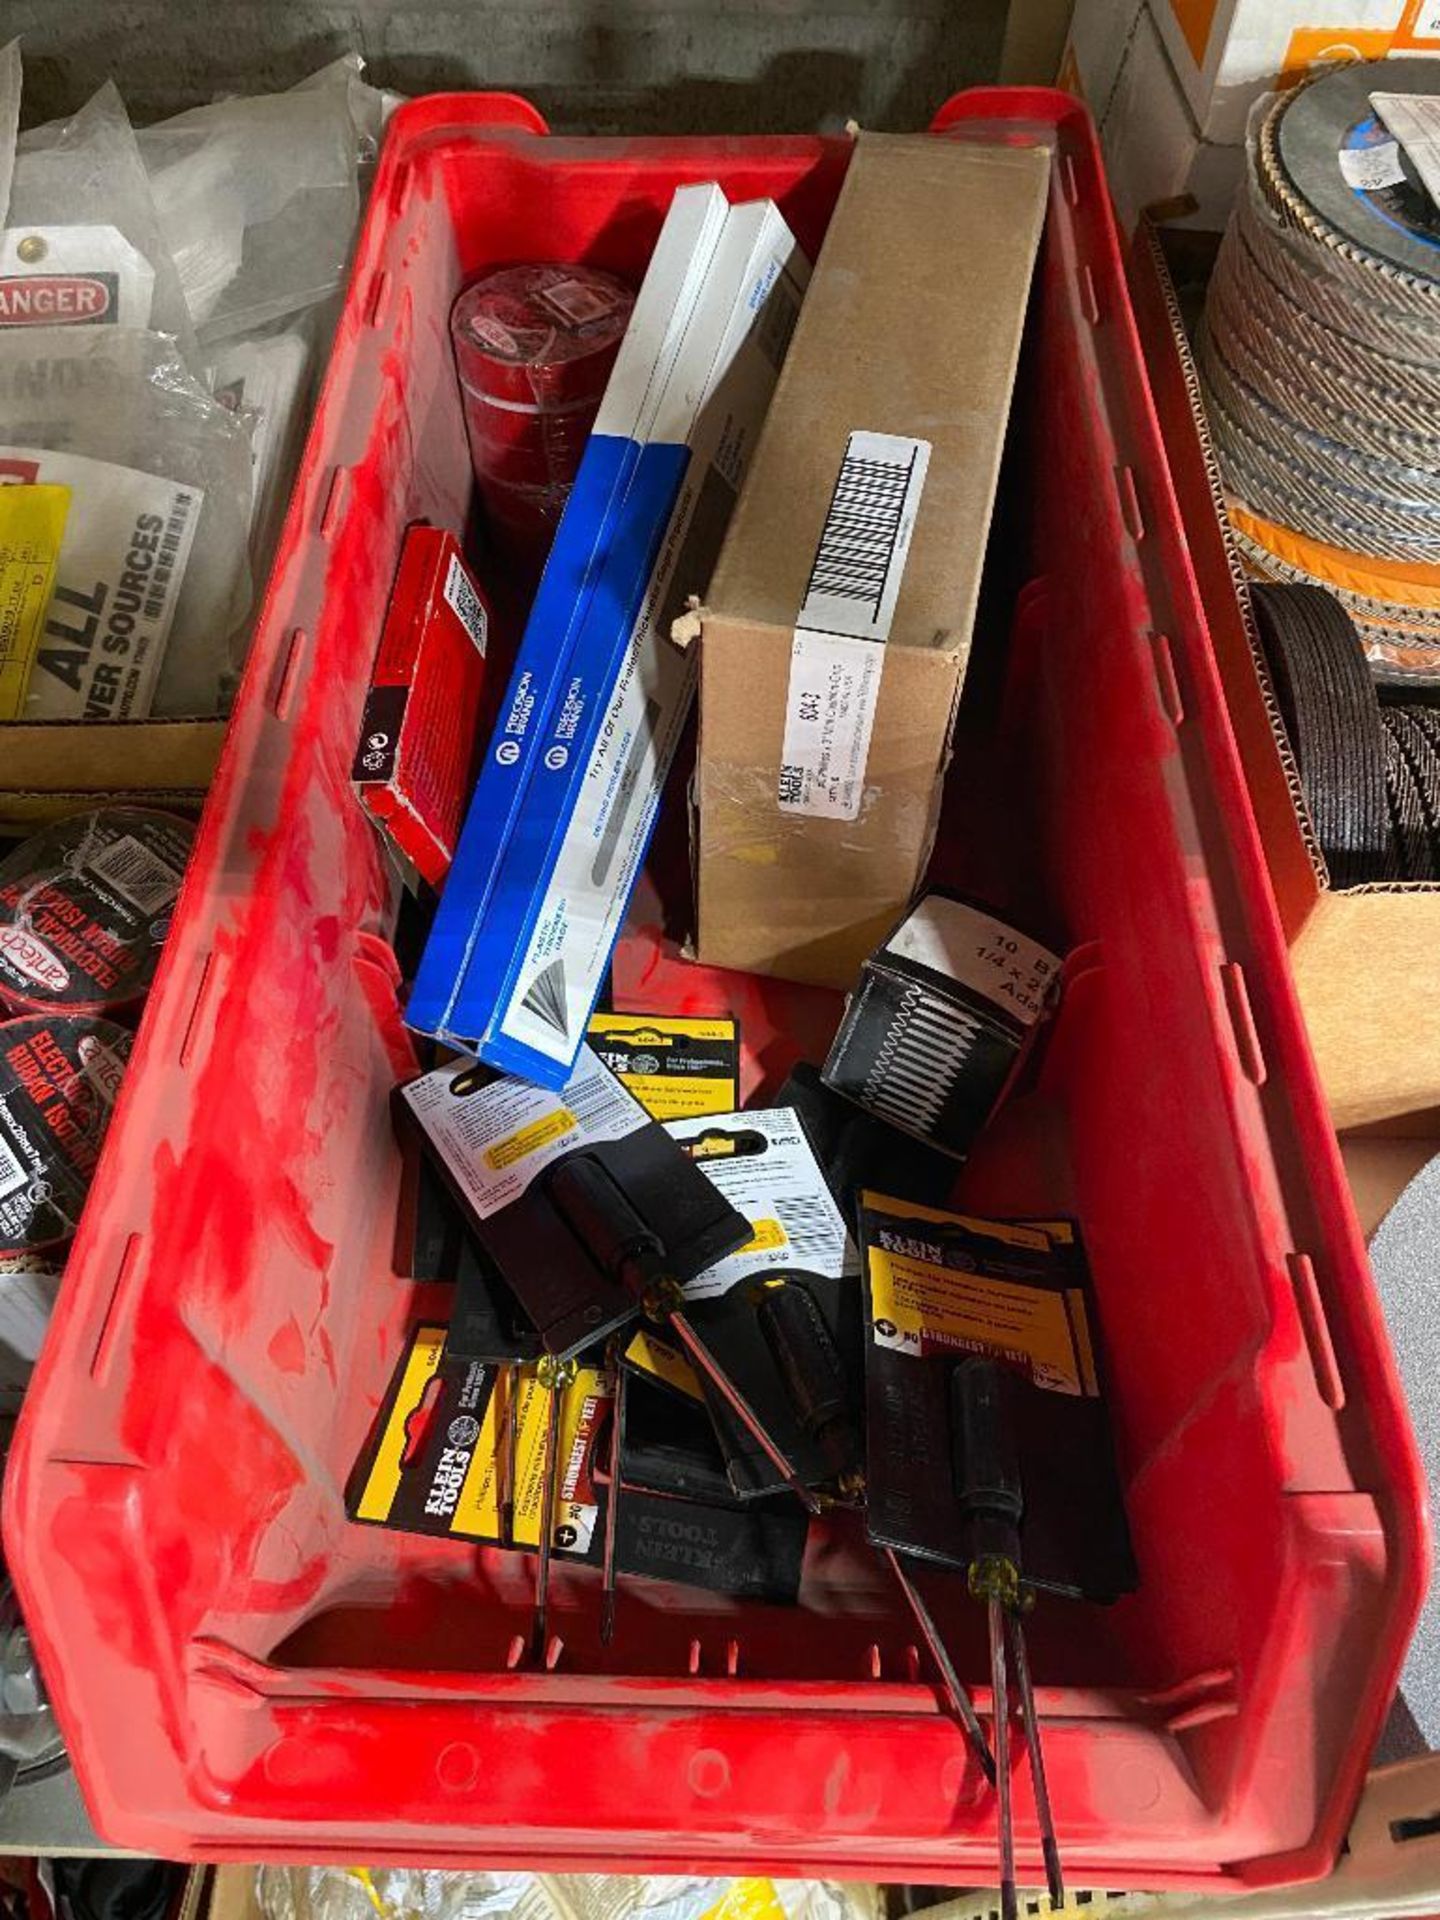 Lot of Asst. Electrical Tape, Screwdrivers, Tags, etc. - Image 2 of 3